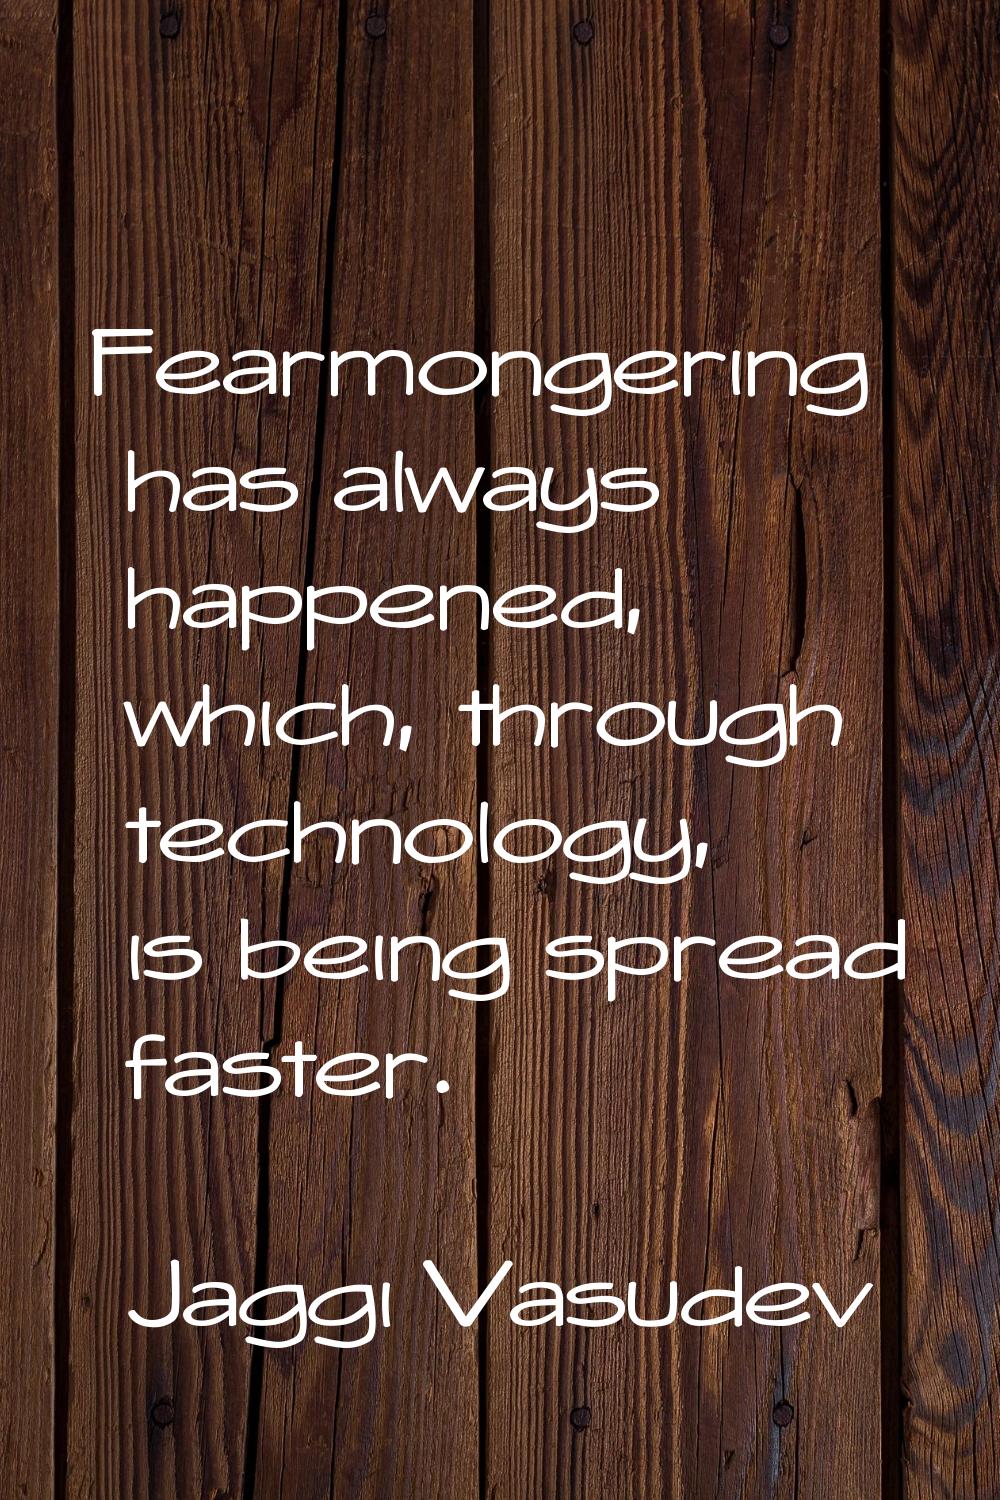 Fearmongering has always happened, which, through technology, is being spread faster.